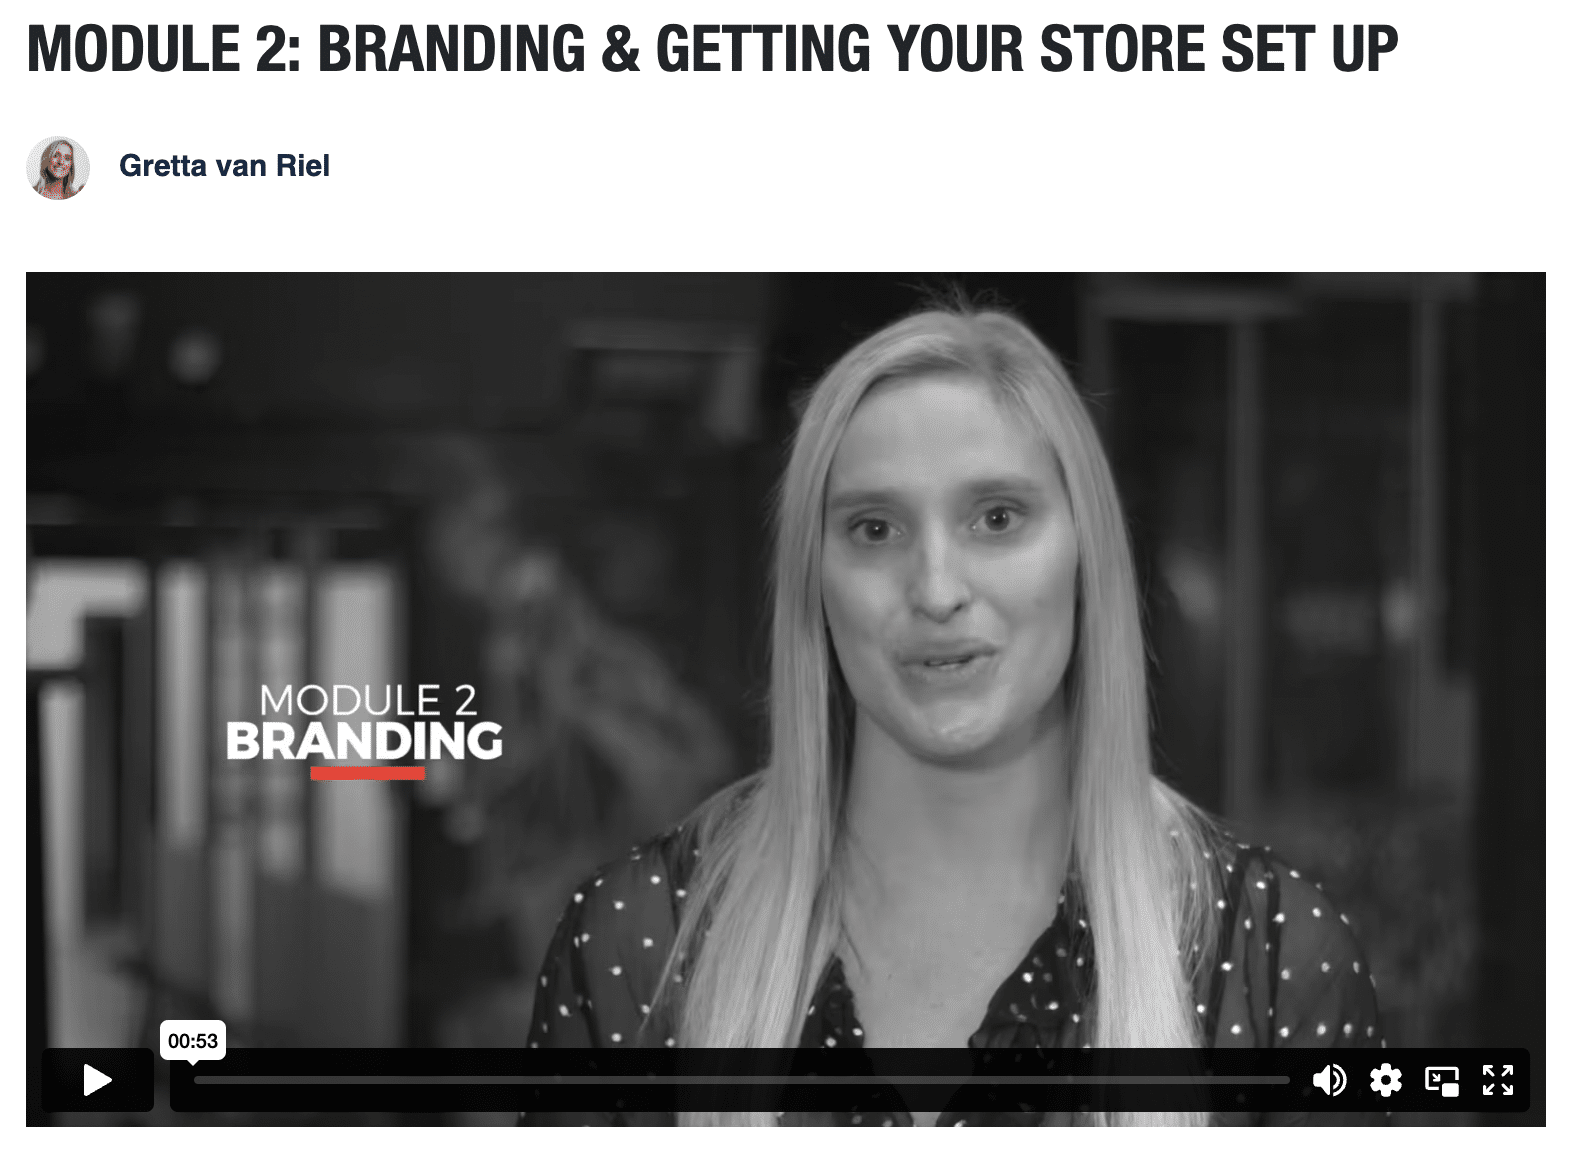 Module 2: Branding & Getting Your Store